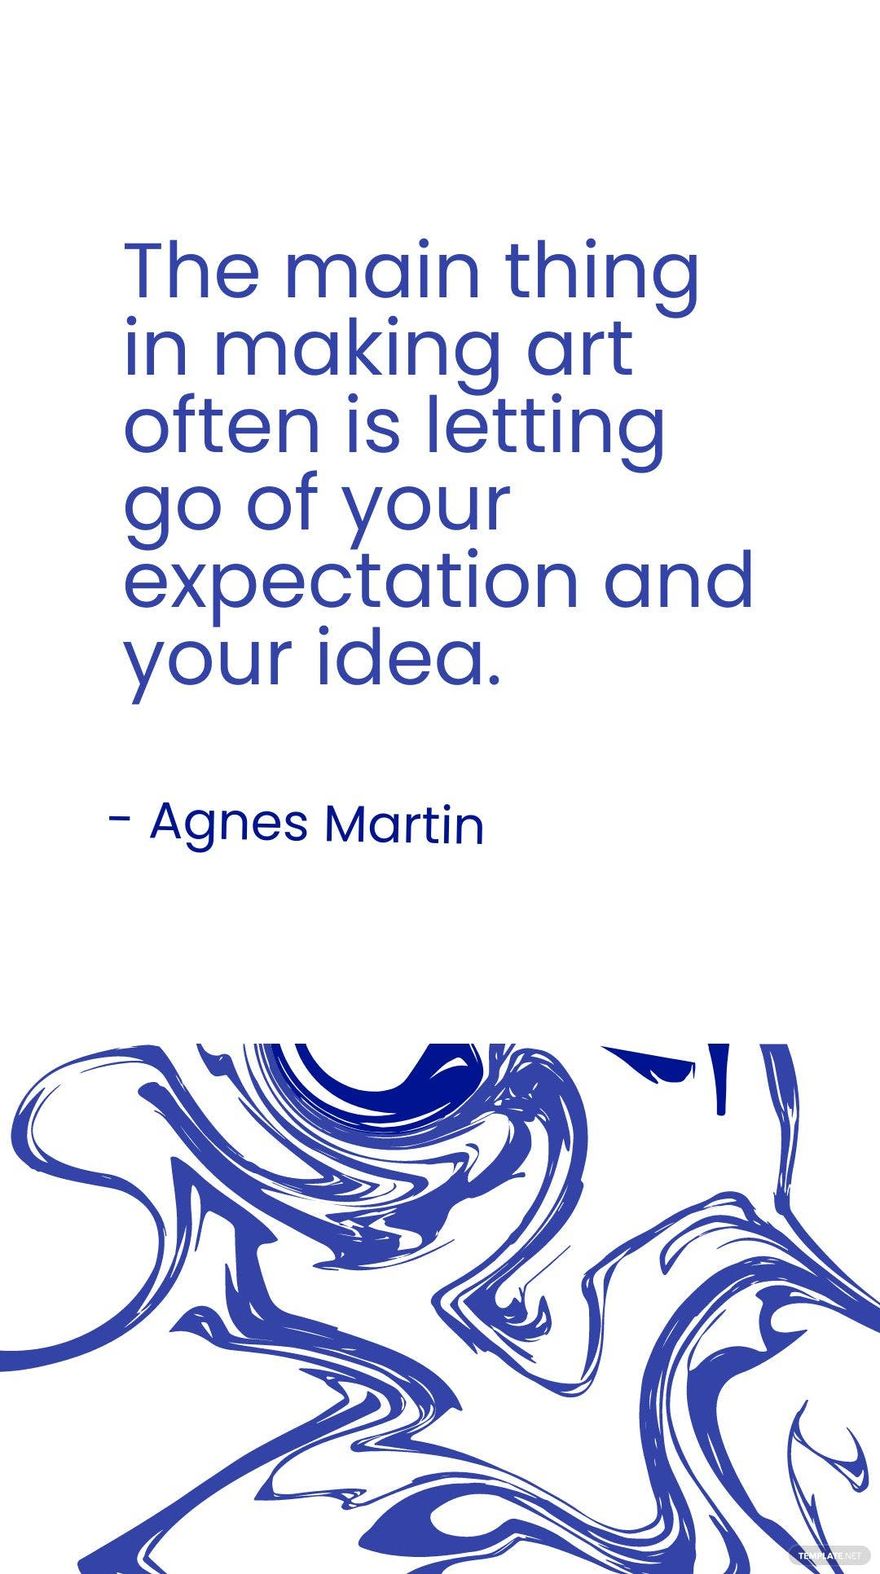 Free Agnes Martin - The main thing in making art often is letting go of your expectation and your idea. in JPG